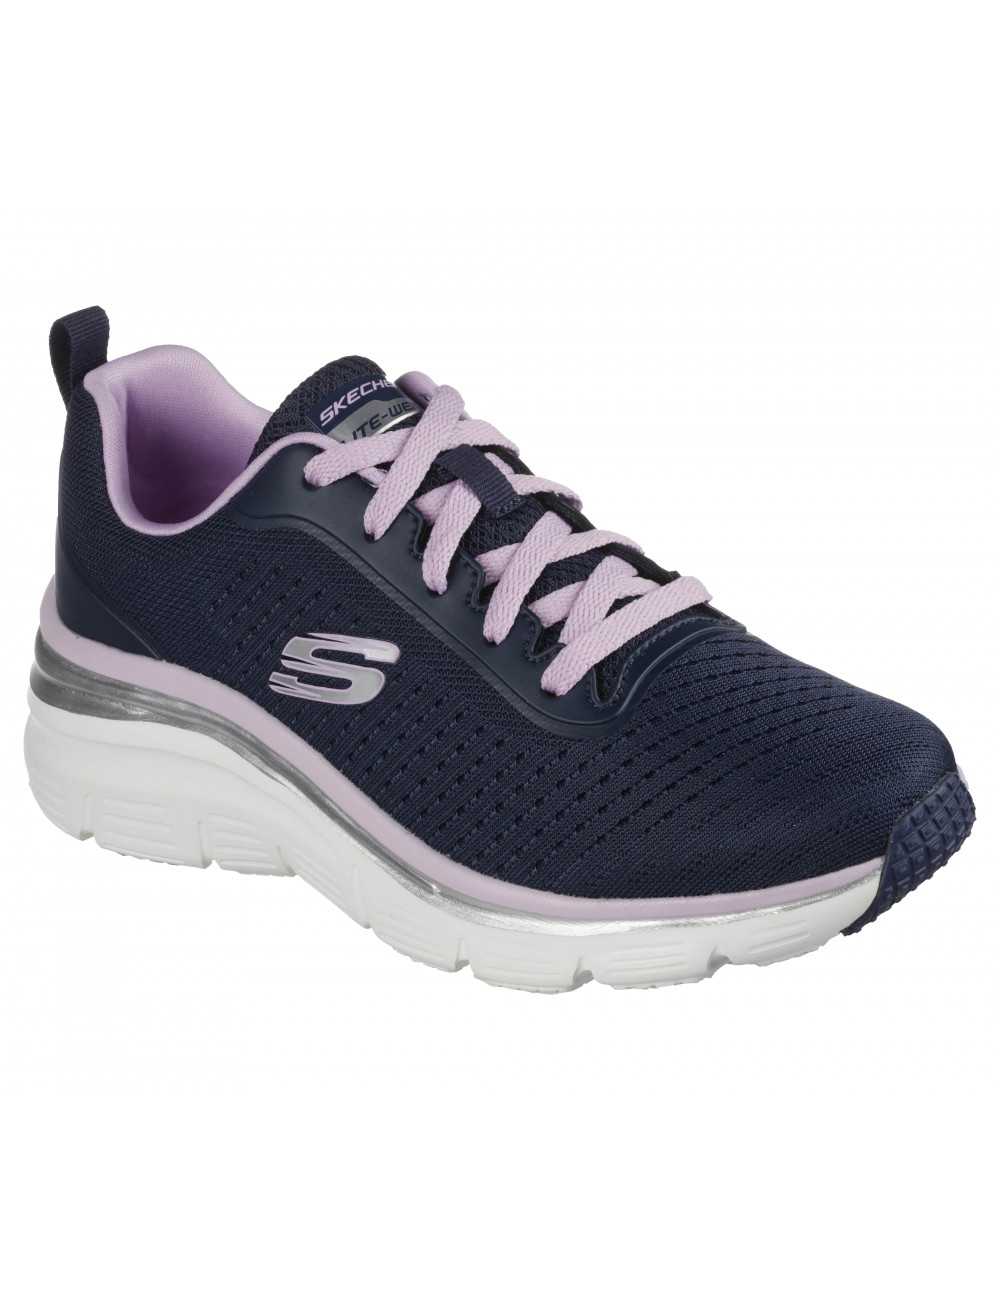 Sneakers and pink | Skechers (149277)